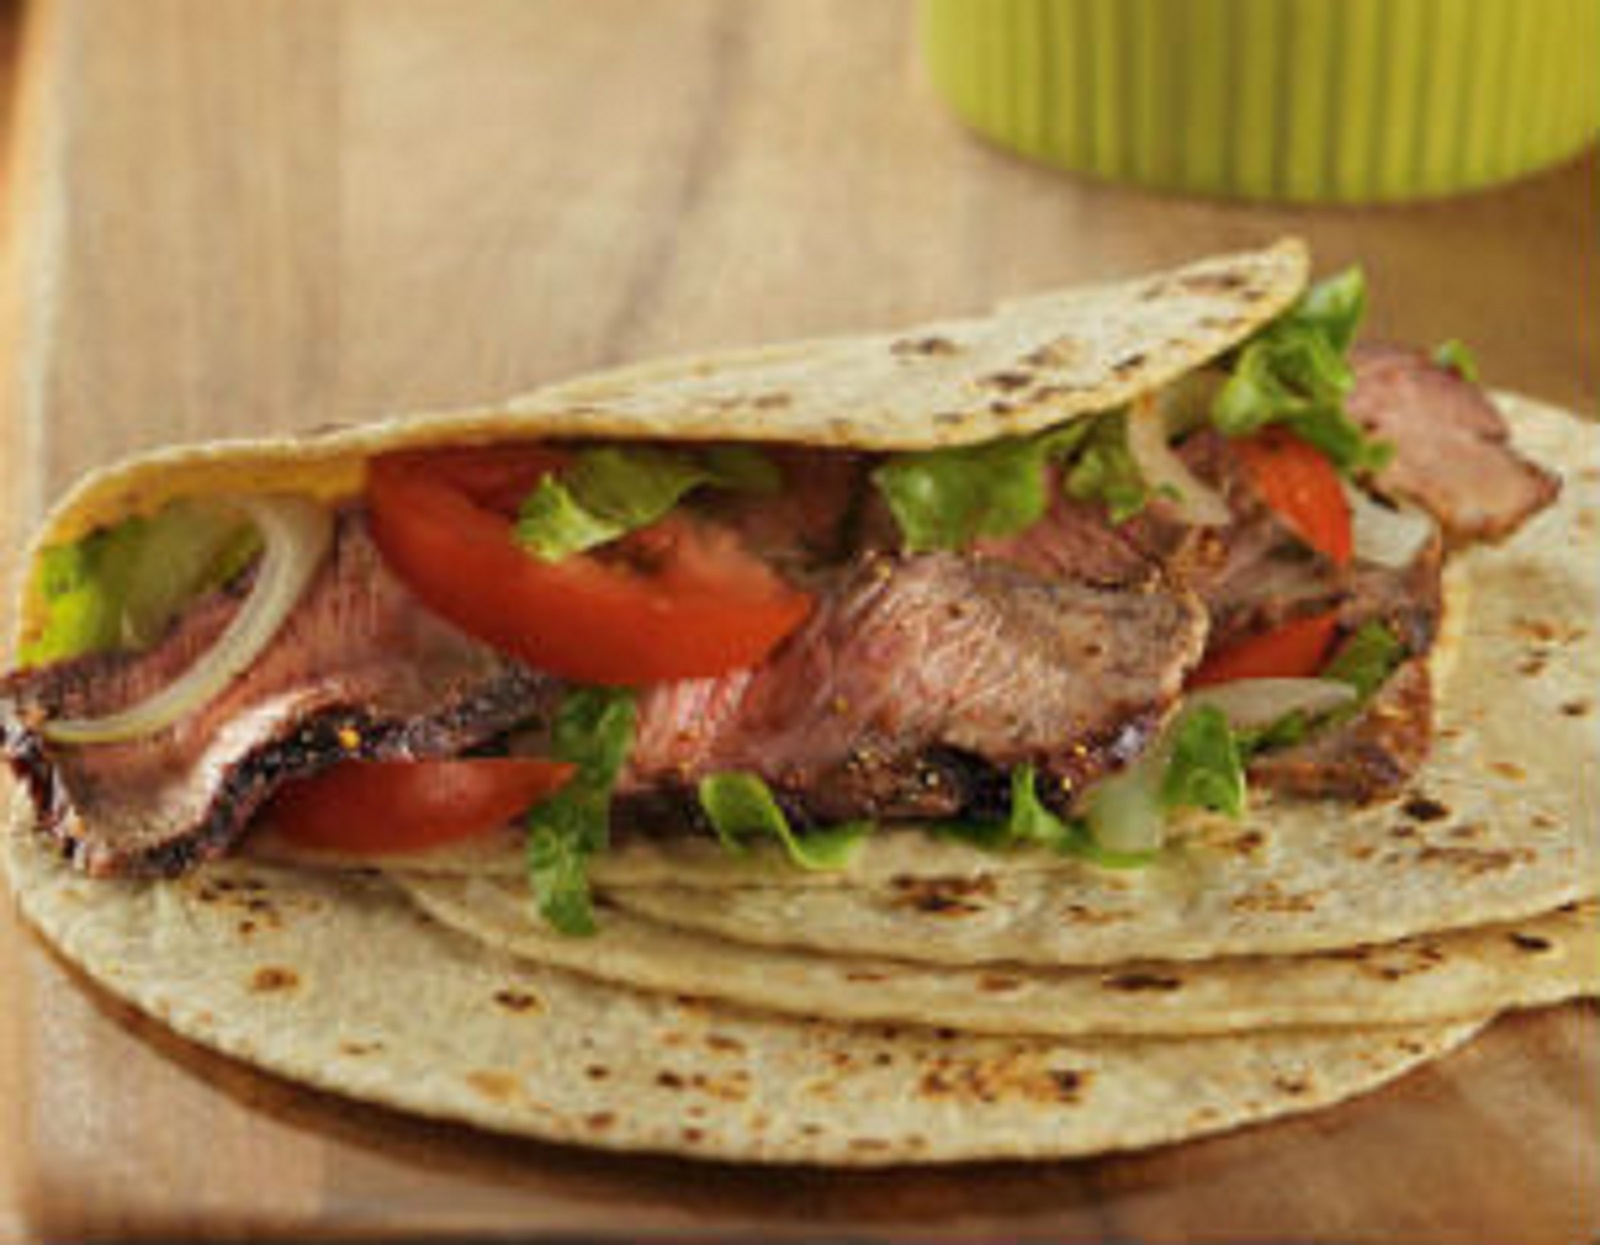 Margaritas Chipotle Steak with Grilled Avocadoes Recipe